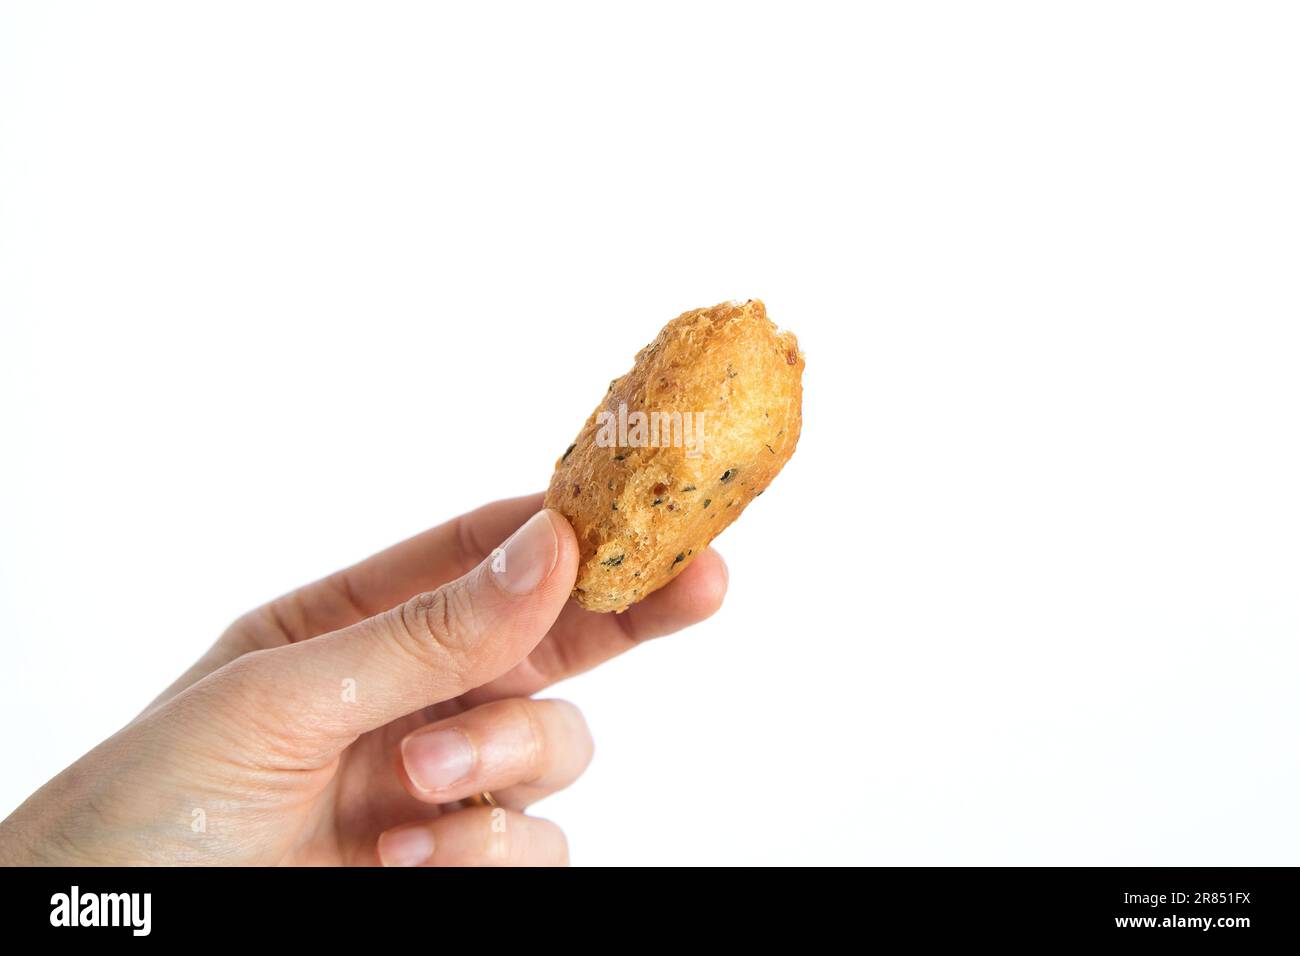 Cod dumpling, or 'bolinho de bacalhau', very famous in Portuguese gastronomy. Fried dumpling, fish, salted cod fritters. Hand holding cod fritter. Stock Photo